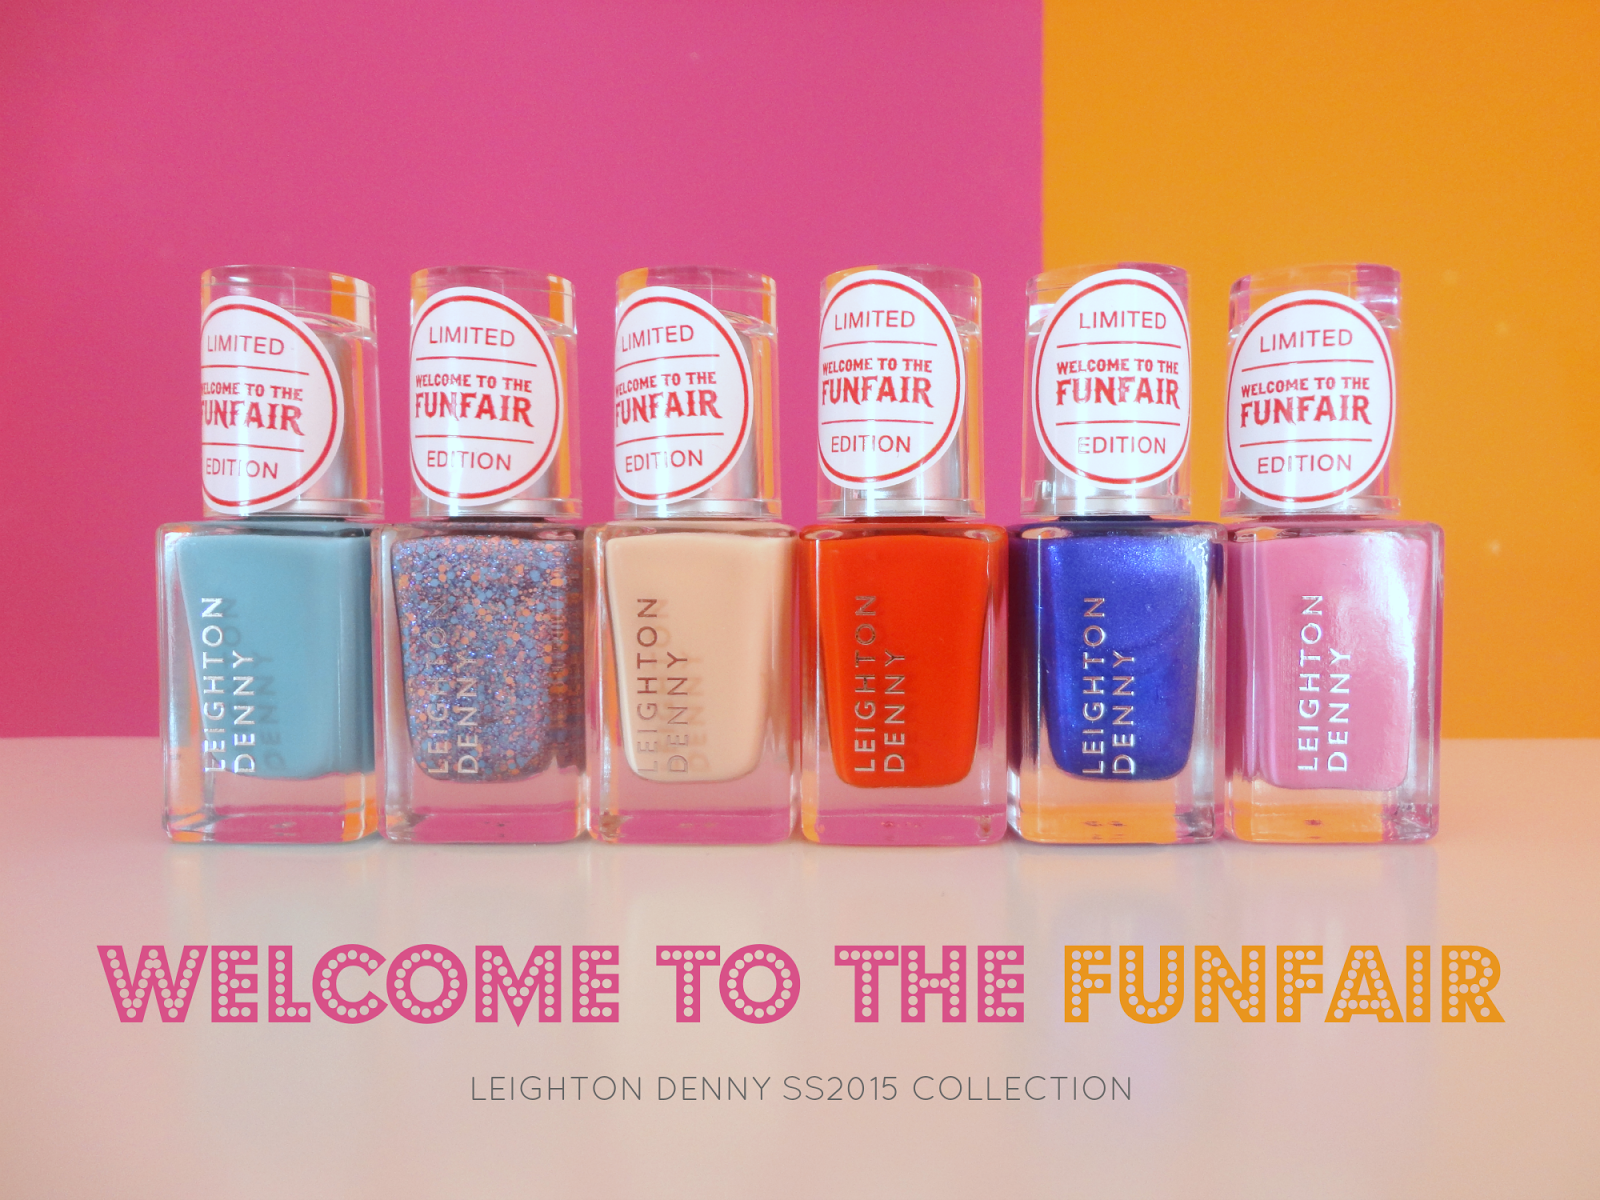 Leighton Denny Spring Summer 2015 Welcome to the Funfair Collection Nail Polish Swatches - www.hairnailsetc.blogspot.co.uk / instagram.com/amyforsythe